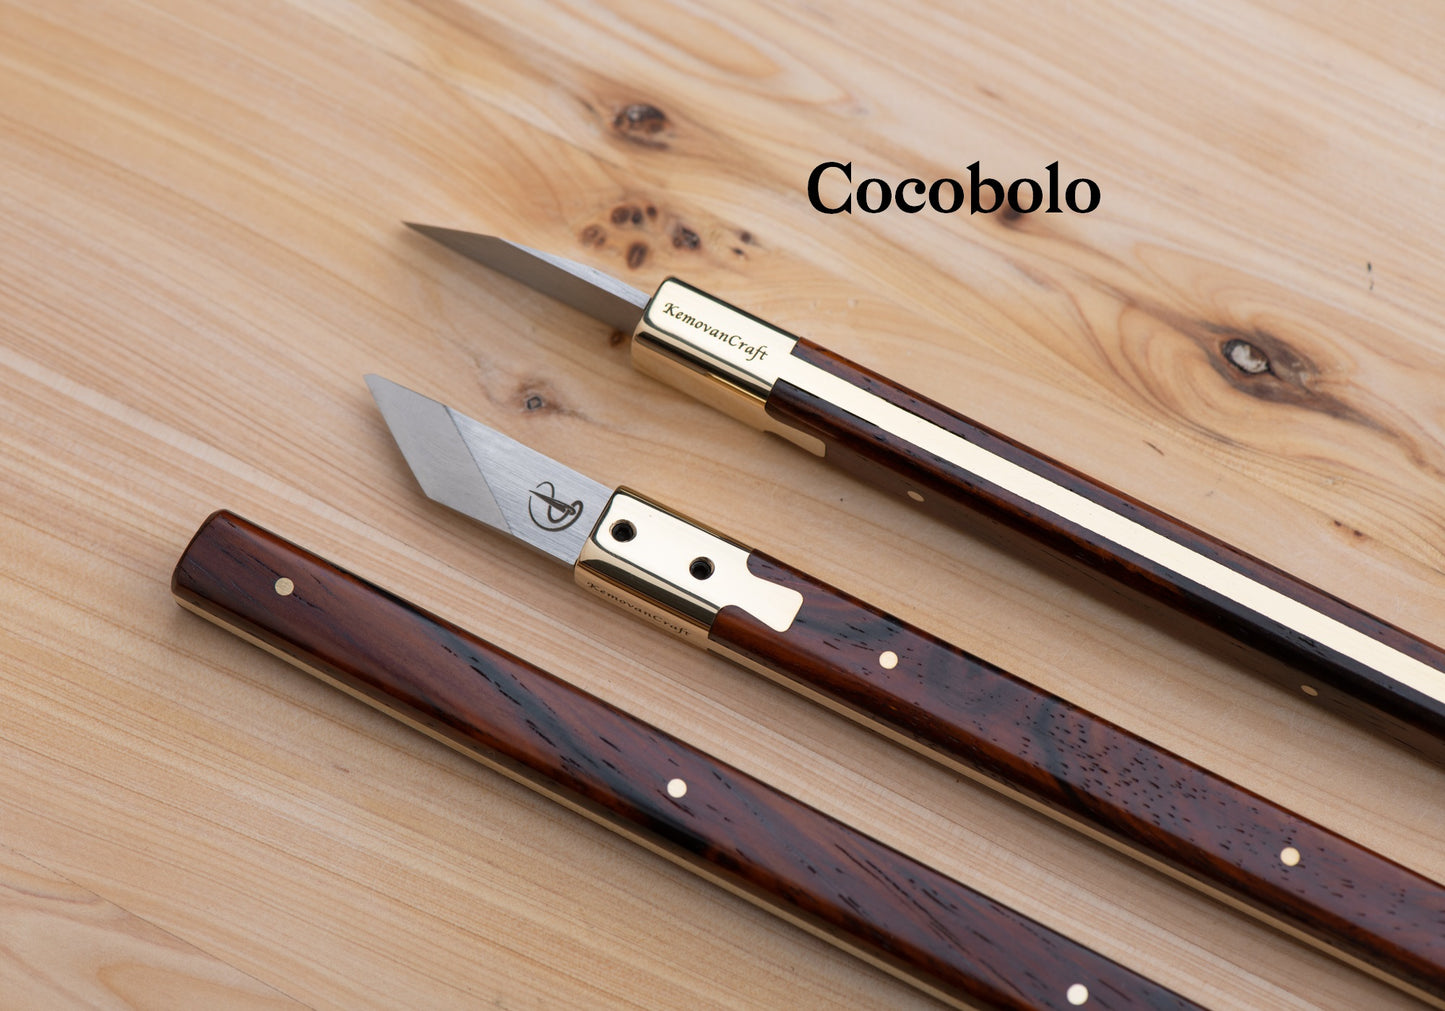 Leather Detachable Cutting Carving Knife -Leather Pattern Pen Knife